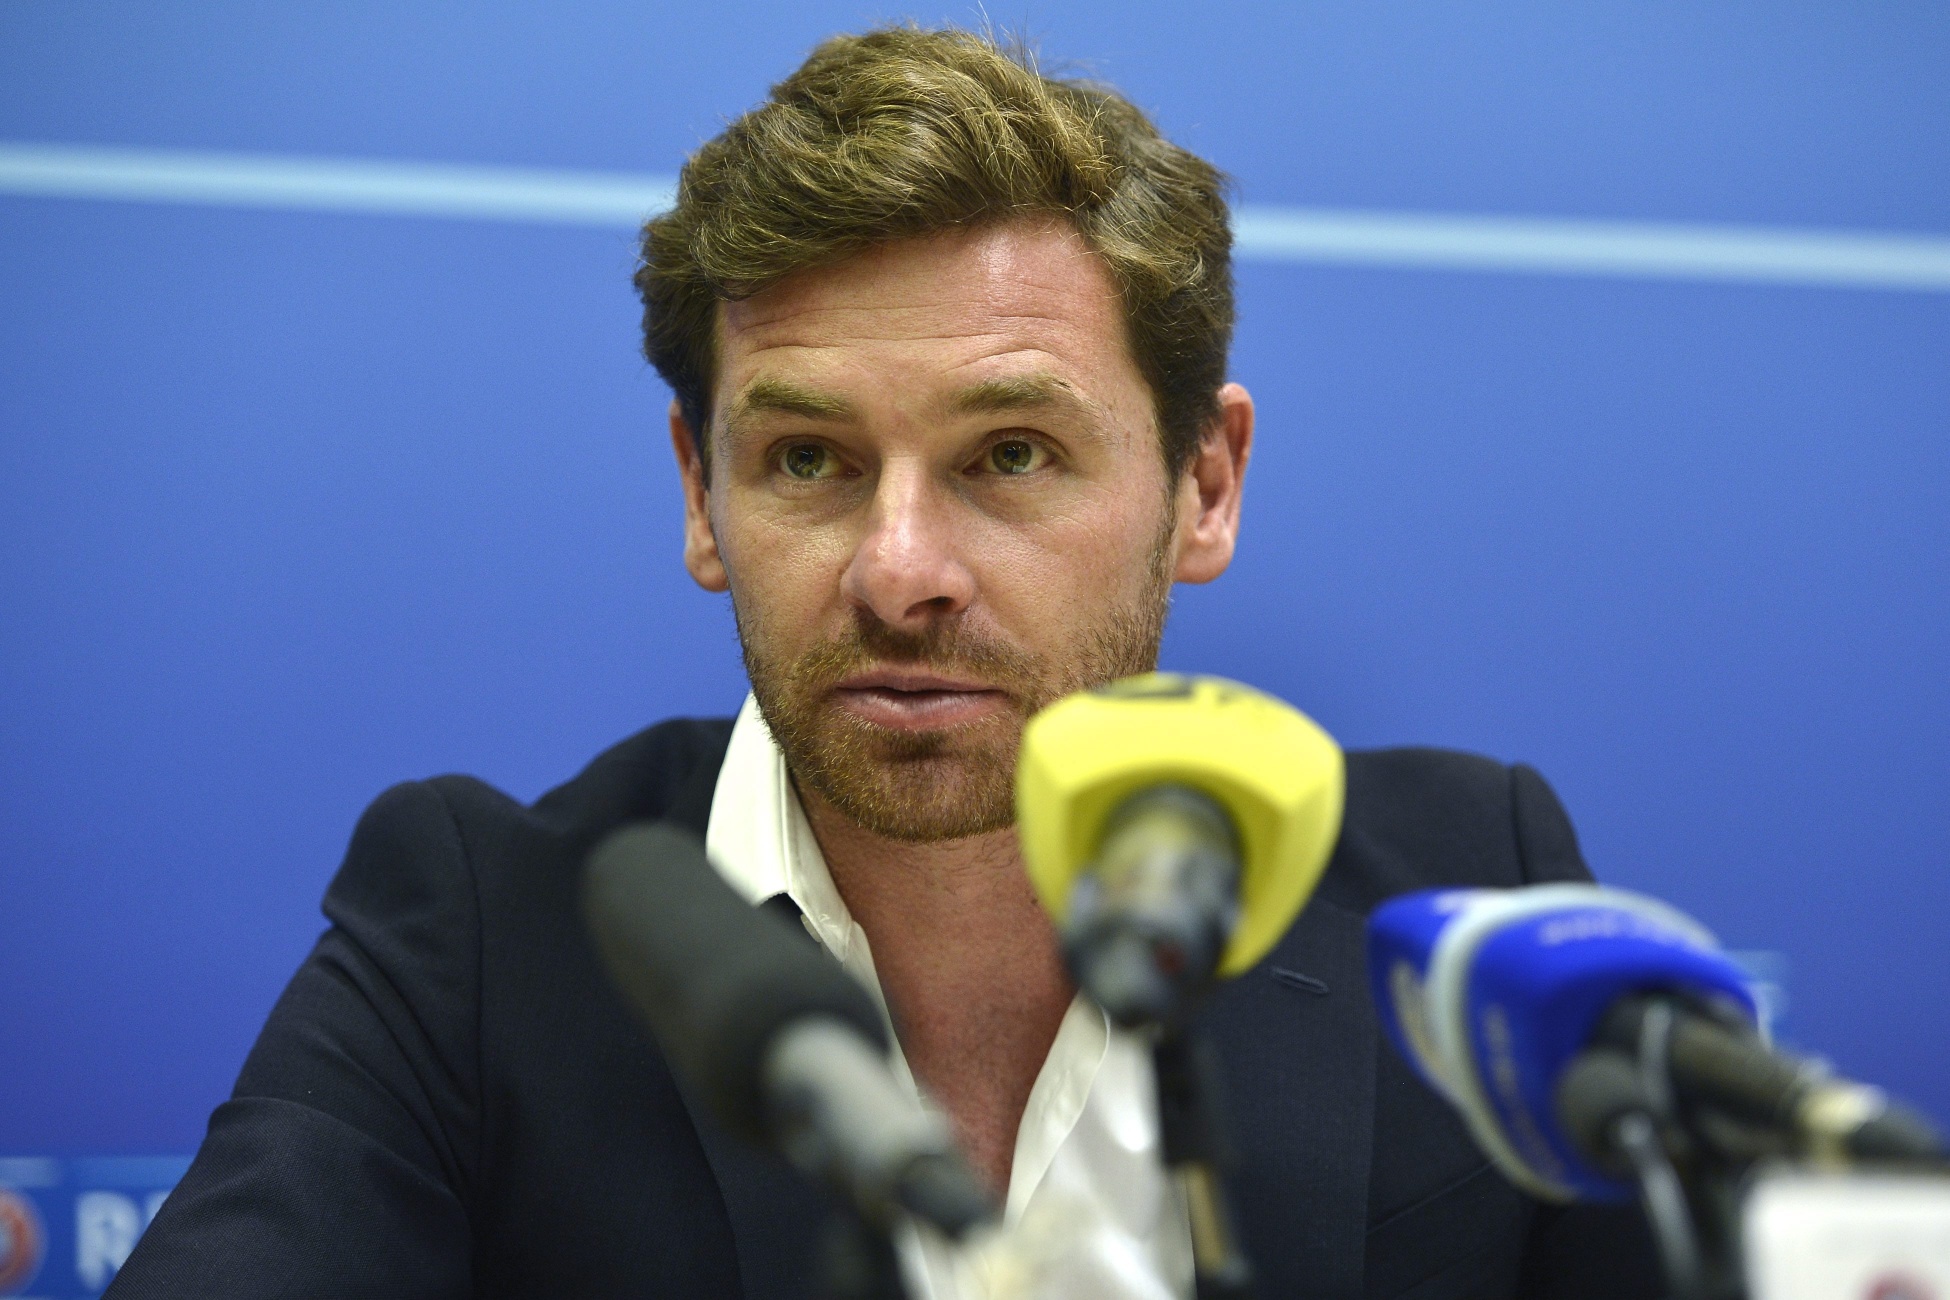 Andre Villas-Boas, the coach of Tottenham Hotspur FC. The term ''yid" has long been used affectionately by supporters of the Premier League club, but rivals has often used it with venom. Photo: AFP